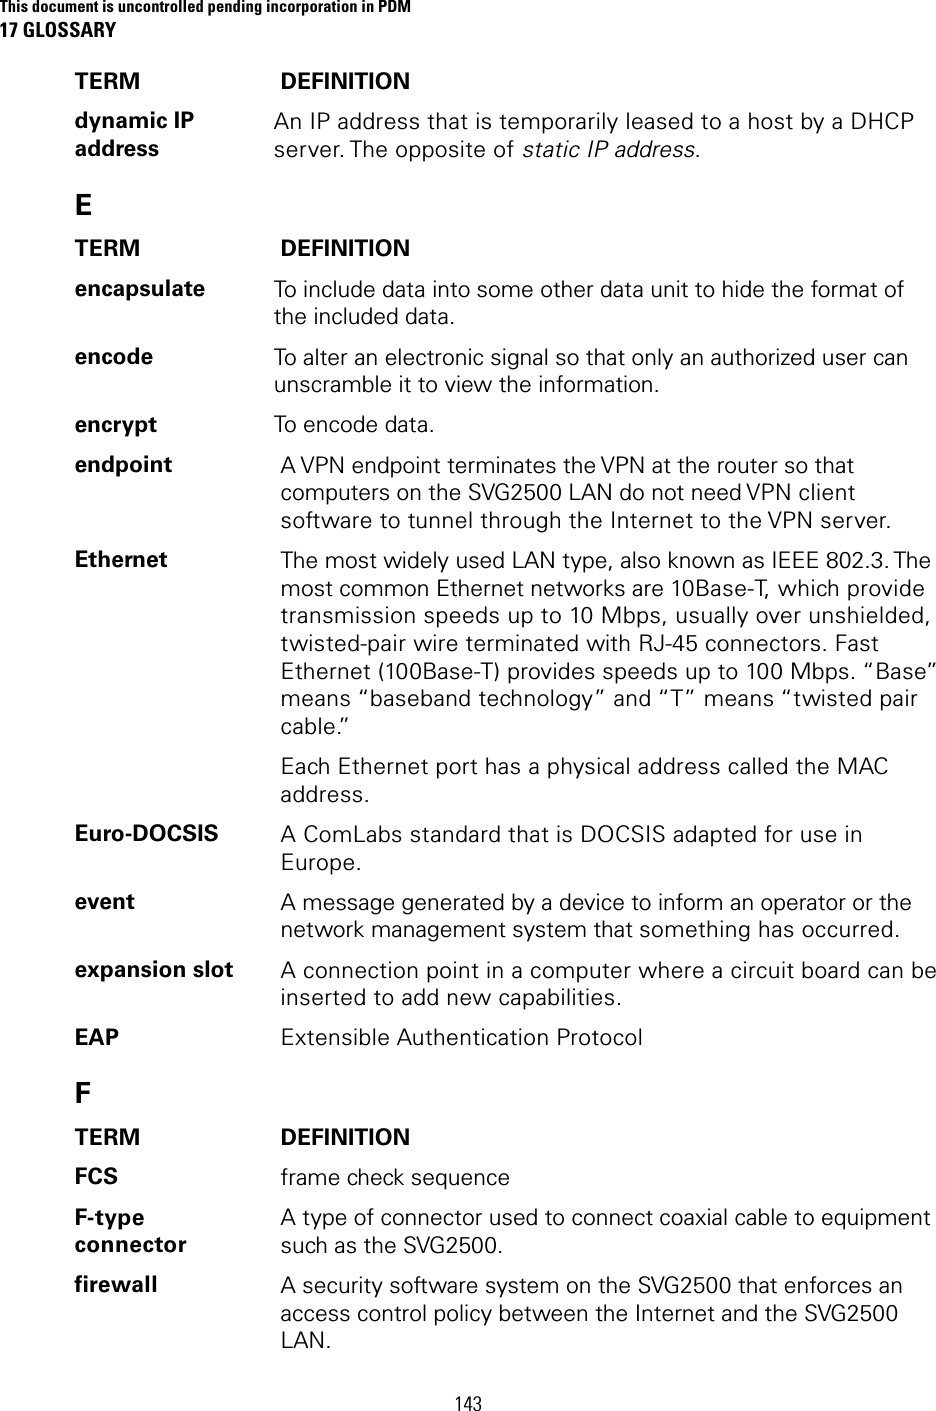 This document is uncontrolled pending incorporation in PDM 17 GLOSSARY  143 TERM DEFINITION dynamic IP address An IP address that is temporarily leased to a host by a DHCP server. The  opposite  of  static IP address. E TERM DEFINITION encapsulate  To include data into some other data unit to hide the format of the included data. encode  To alter an electronic signal so that only an authorized user can unscramble it to view the information. encrypt  To encode data. endpoint  A VPN endpoint terminates the VPN at the router so that computers on the SVG2500 LAN do not need VPN client software to tunnel through the Internet to the VPN server. Ethernet  The most widely used LAN type, also known as IEEE 802.3. The most common Ethernet networks are 10Base-T, which provide transmission speeds up to 10 Mbps, usually over unshielded, twisted-pair wire terminated with RJ-45 connectors. Fast Ethernet (100Base-T) provides speeds up to 100 Mbps. “Base” means “baseband technology” and “T” means “twisted pair cable.” Each Ethernet port has a physical address called the MAC address. Euro-DOCSIS  A ComLabs standard that is DOCSIS adapted for use in Europe. event  A message generated by a device to inform an operator or the network management system that something has occurred. expansion slot  A connection point in a computer where a circuit board can be inserted to add new capabilities. EAP  Extensible Authentication Protocol F TERM DEFINITION FCS  frame check sequence F-type connector A type of connector used to connect coaxial cable to equipment such as the SVG2500. firewall  A security software system on the SVG2500 that enforces an access control policy between the Internet and the SVG2500 LAN. 